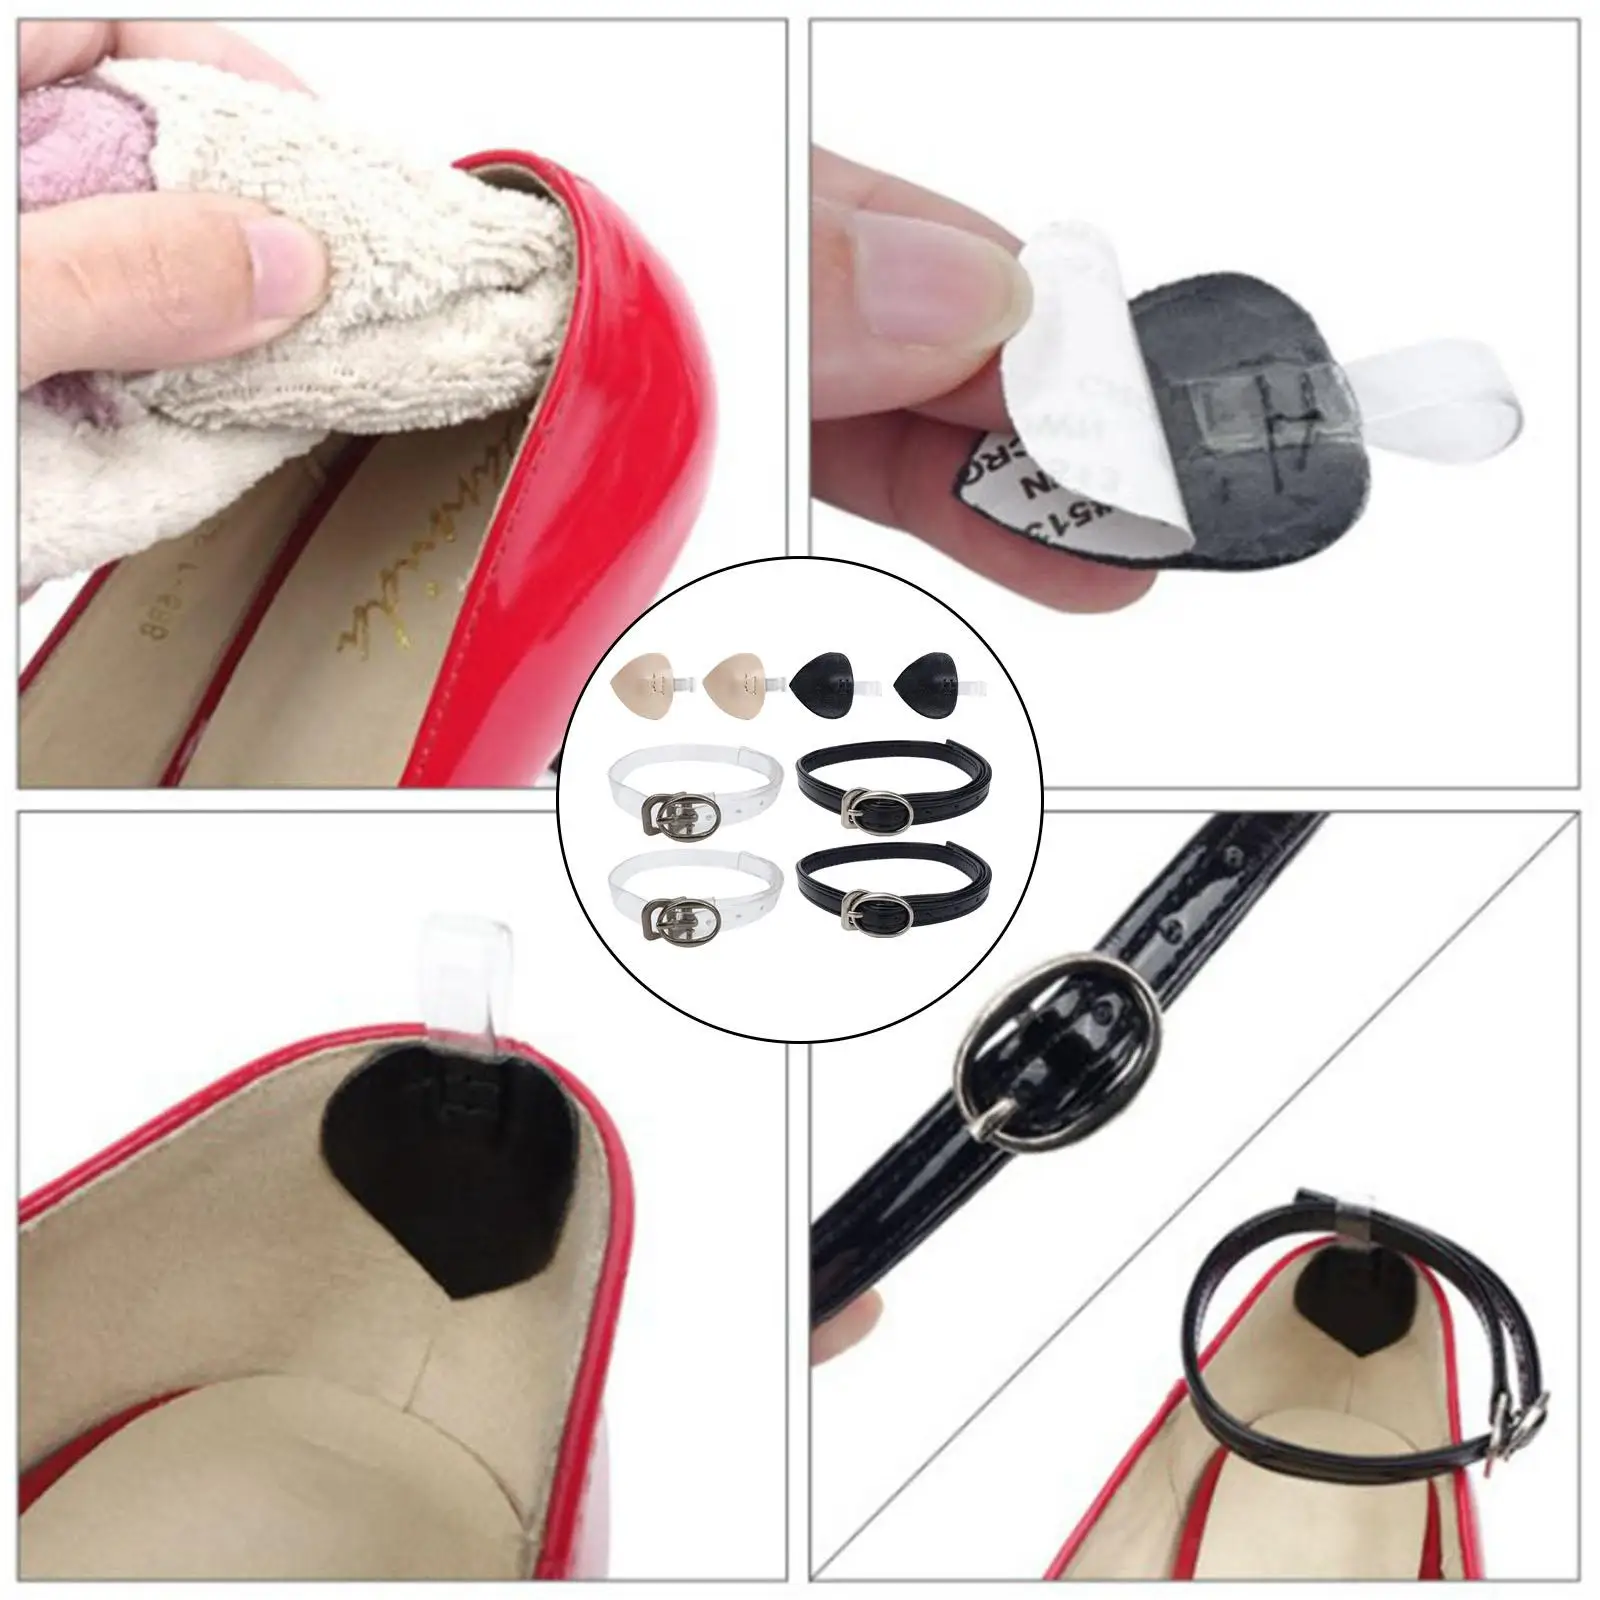 2x Detachable High Heels Anti-Slip Shoe Straps Self-Adhesive Heel Cushion Inserts Shoe Belt Accessories Ankle Tie Band for Party